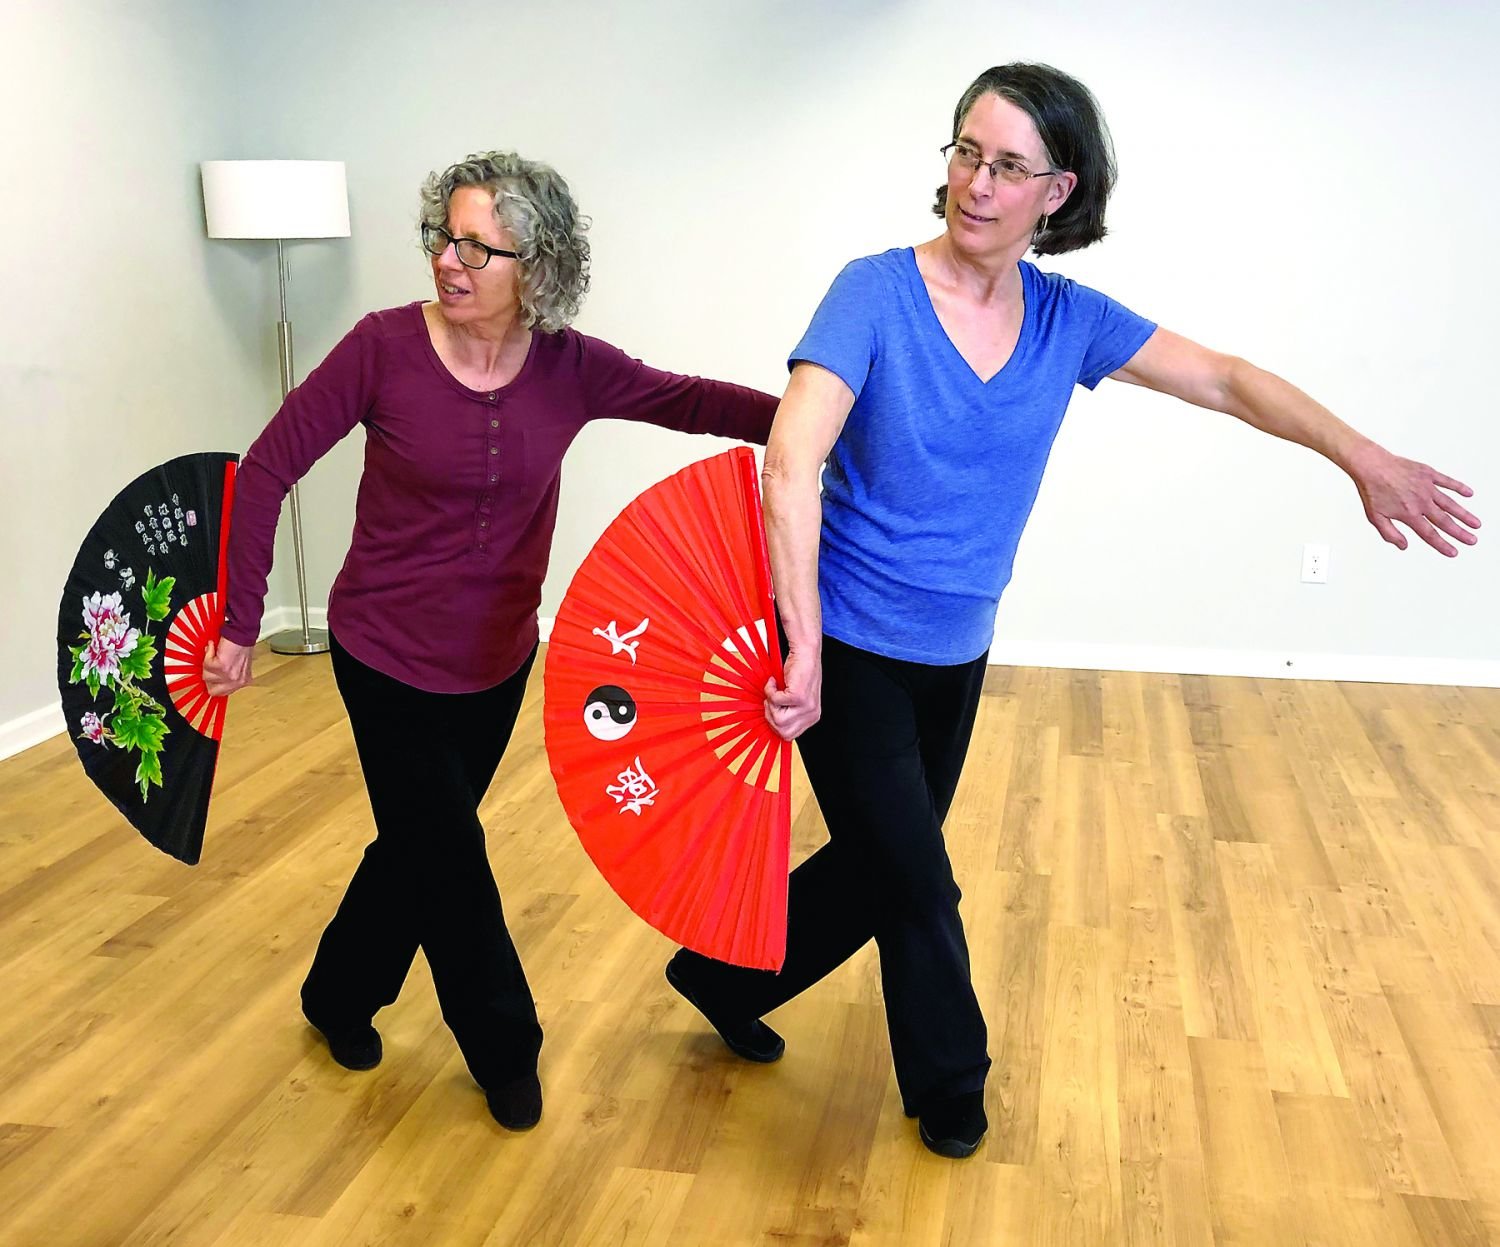 Diane Alex, left, and Kate Kane practice a Tai Chi fan form, which will be demonstrated at Koru Real Wellness April 27.